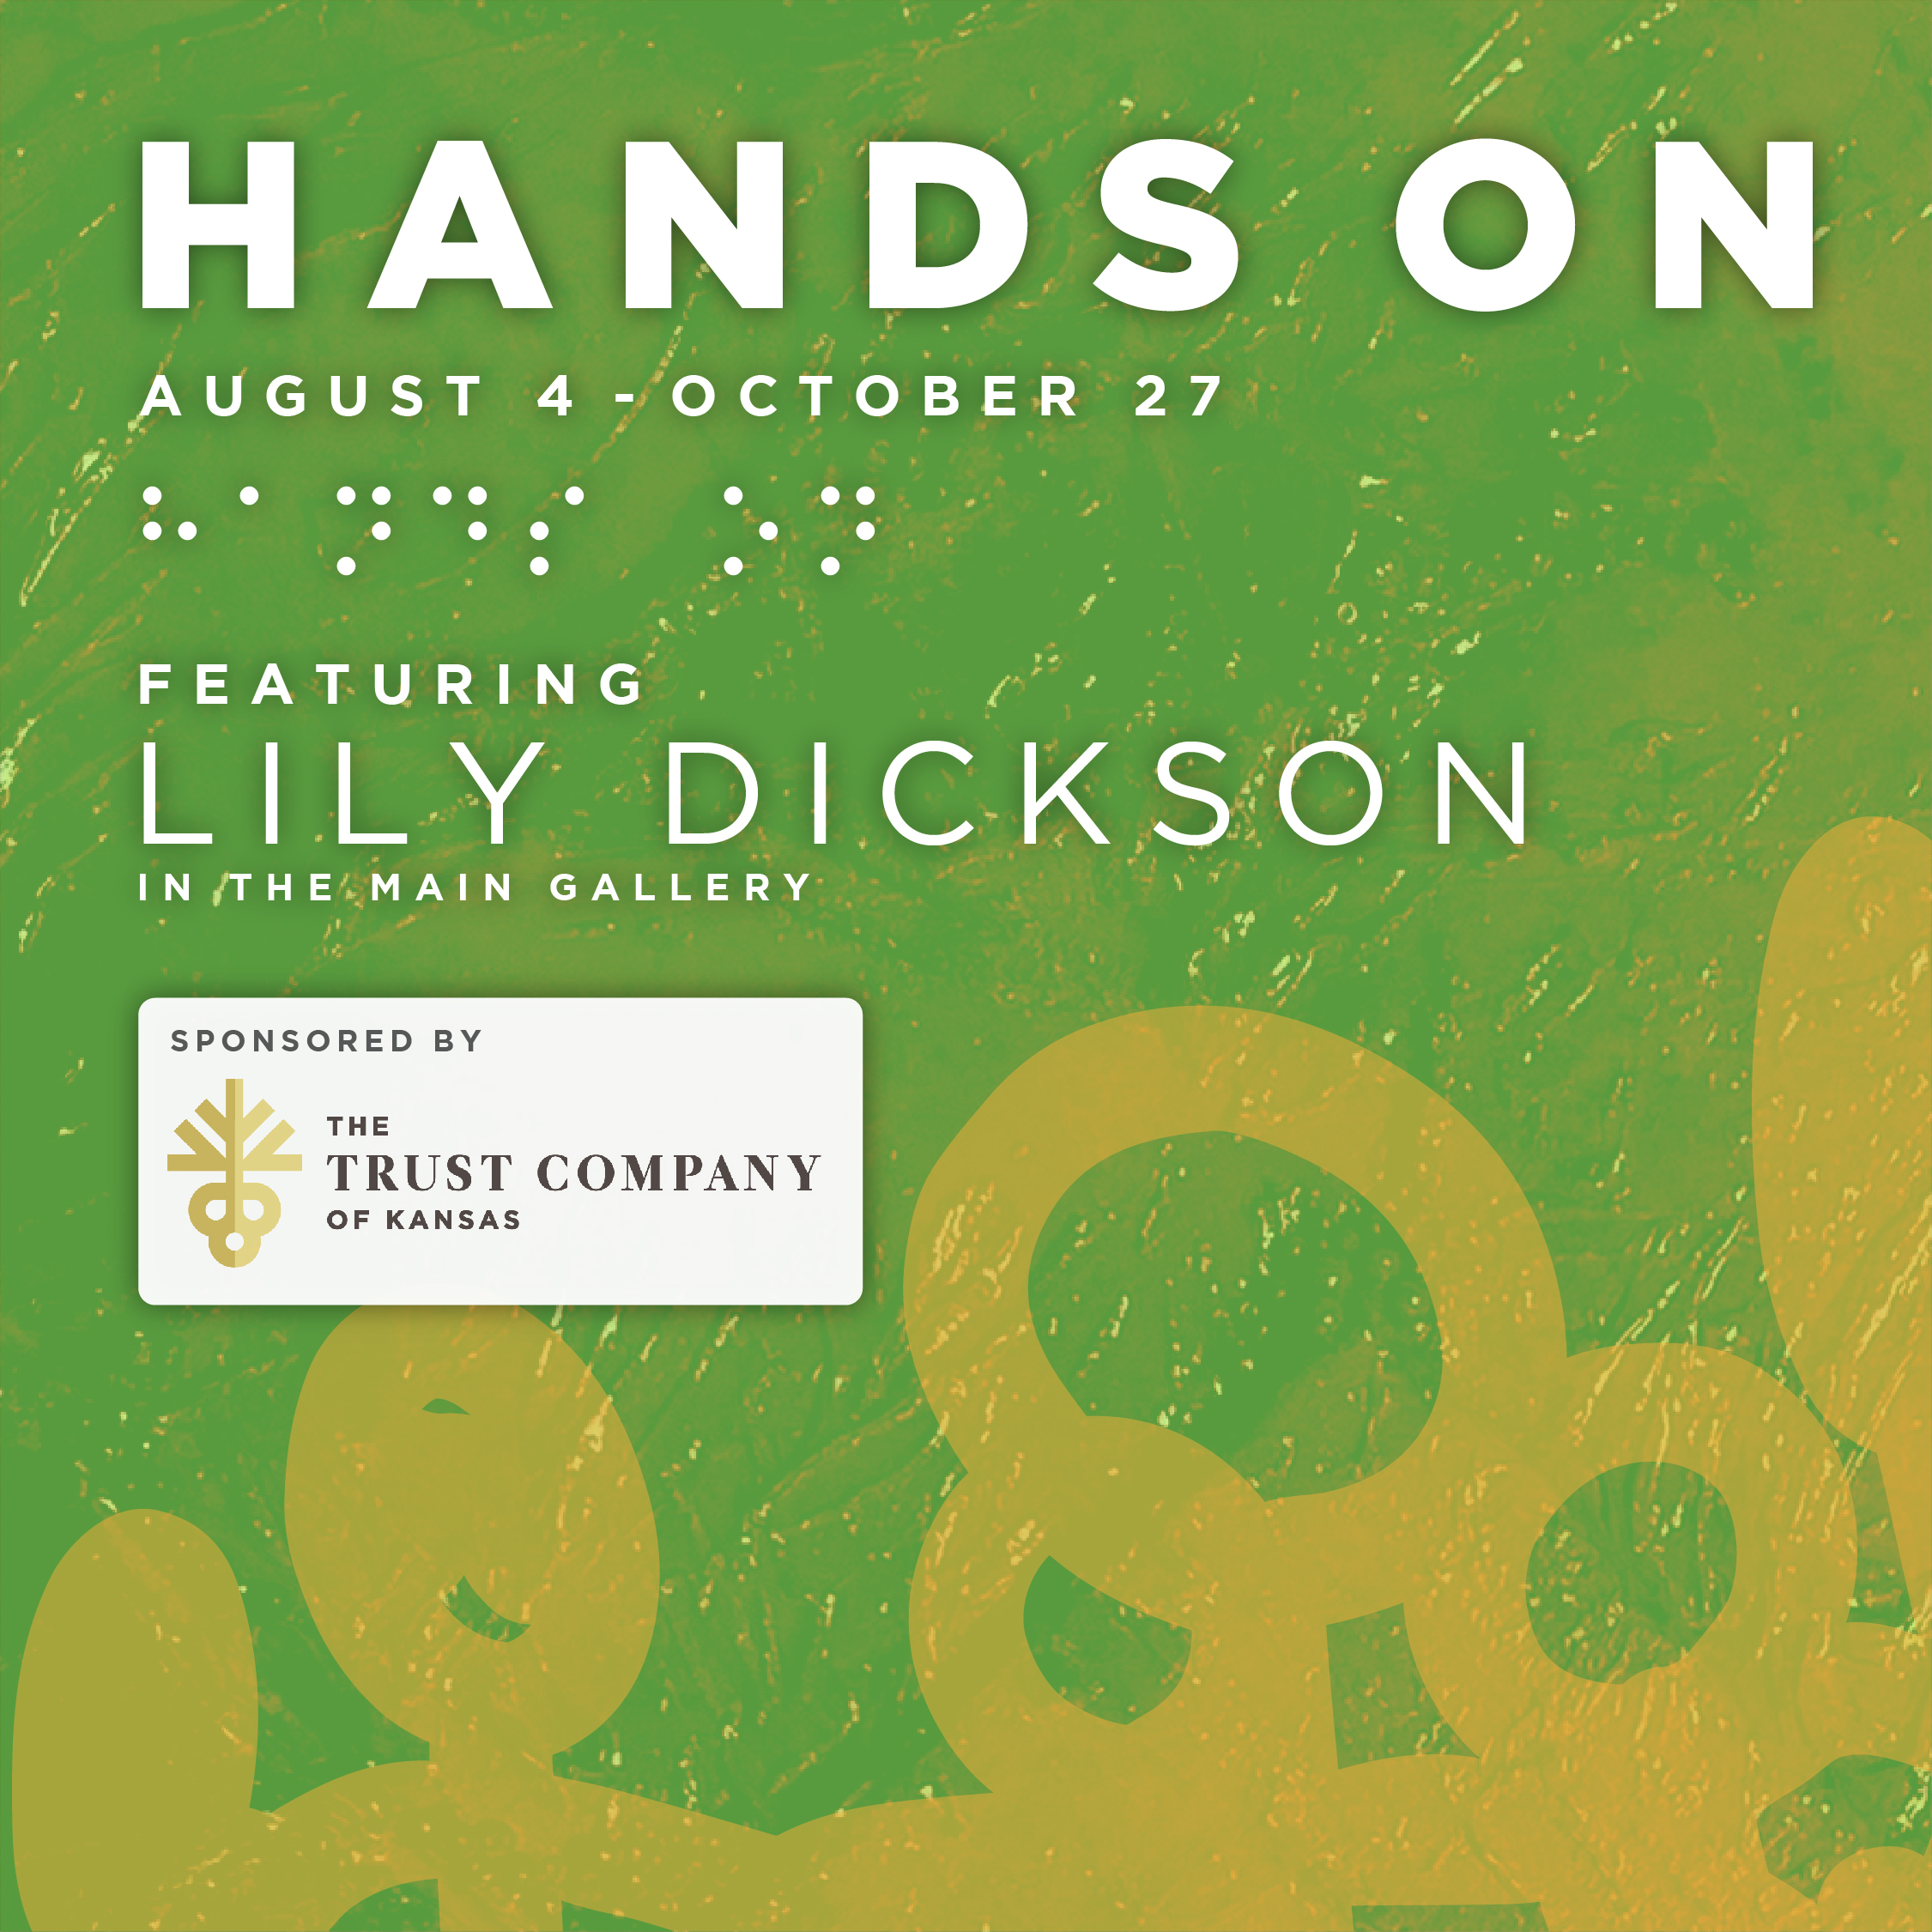 Text that says "HANDS ON, August 4-October 27th featuring Lily Dickson, sponsored by the Trust Company of Kansas, at the Envision Arts Gallery."